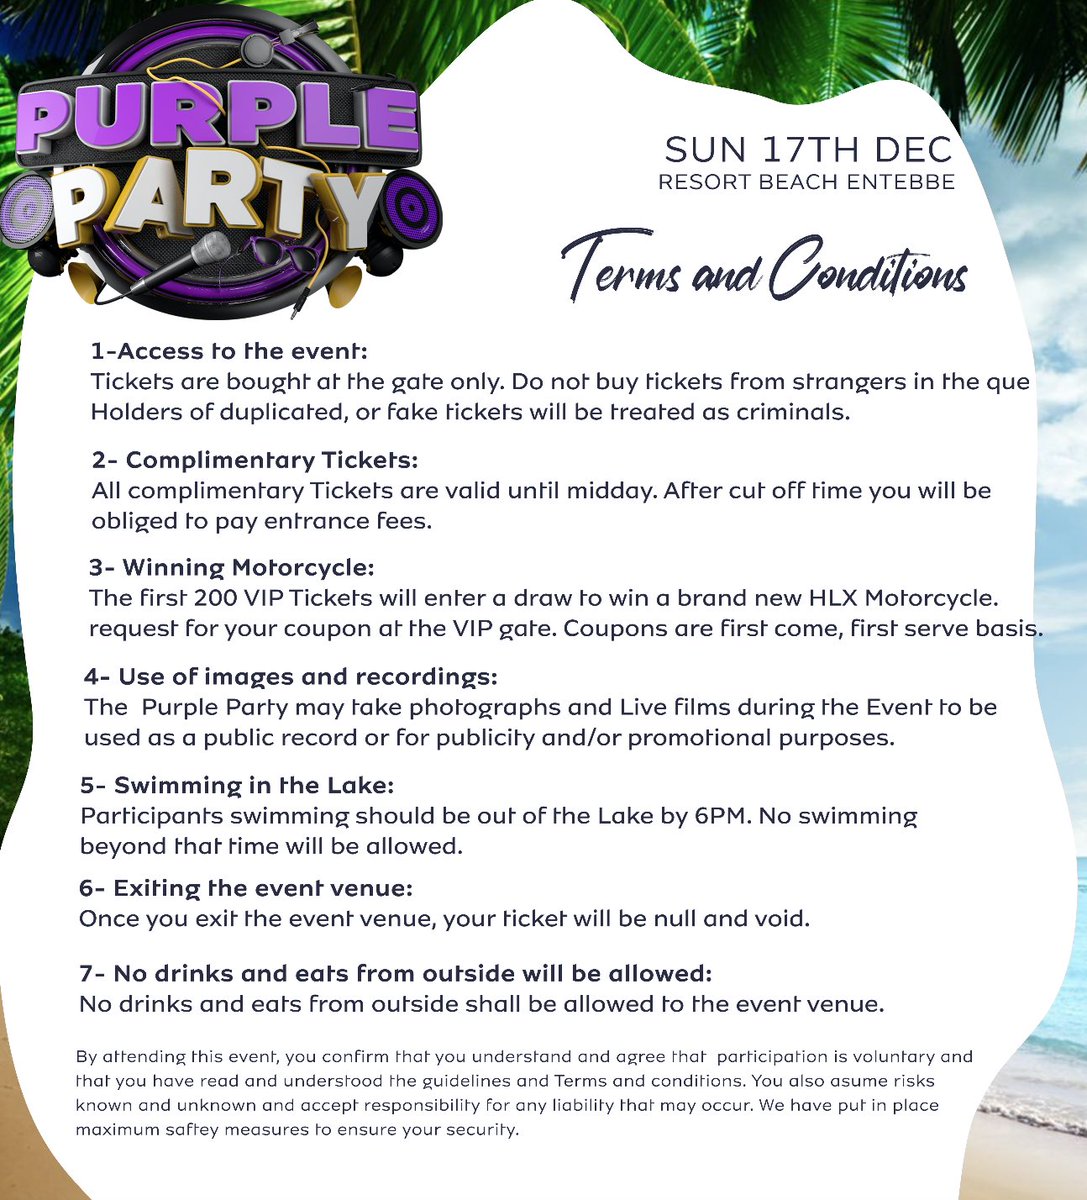 Directions to Resort Beach Entebbe and #PurplePartyTour Event Terms and Conditions. See y’all Tomorrow. Lets make History. 💜